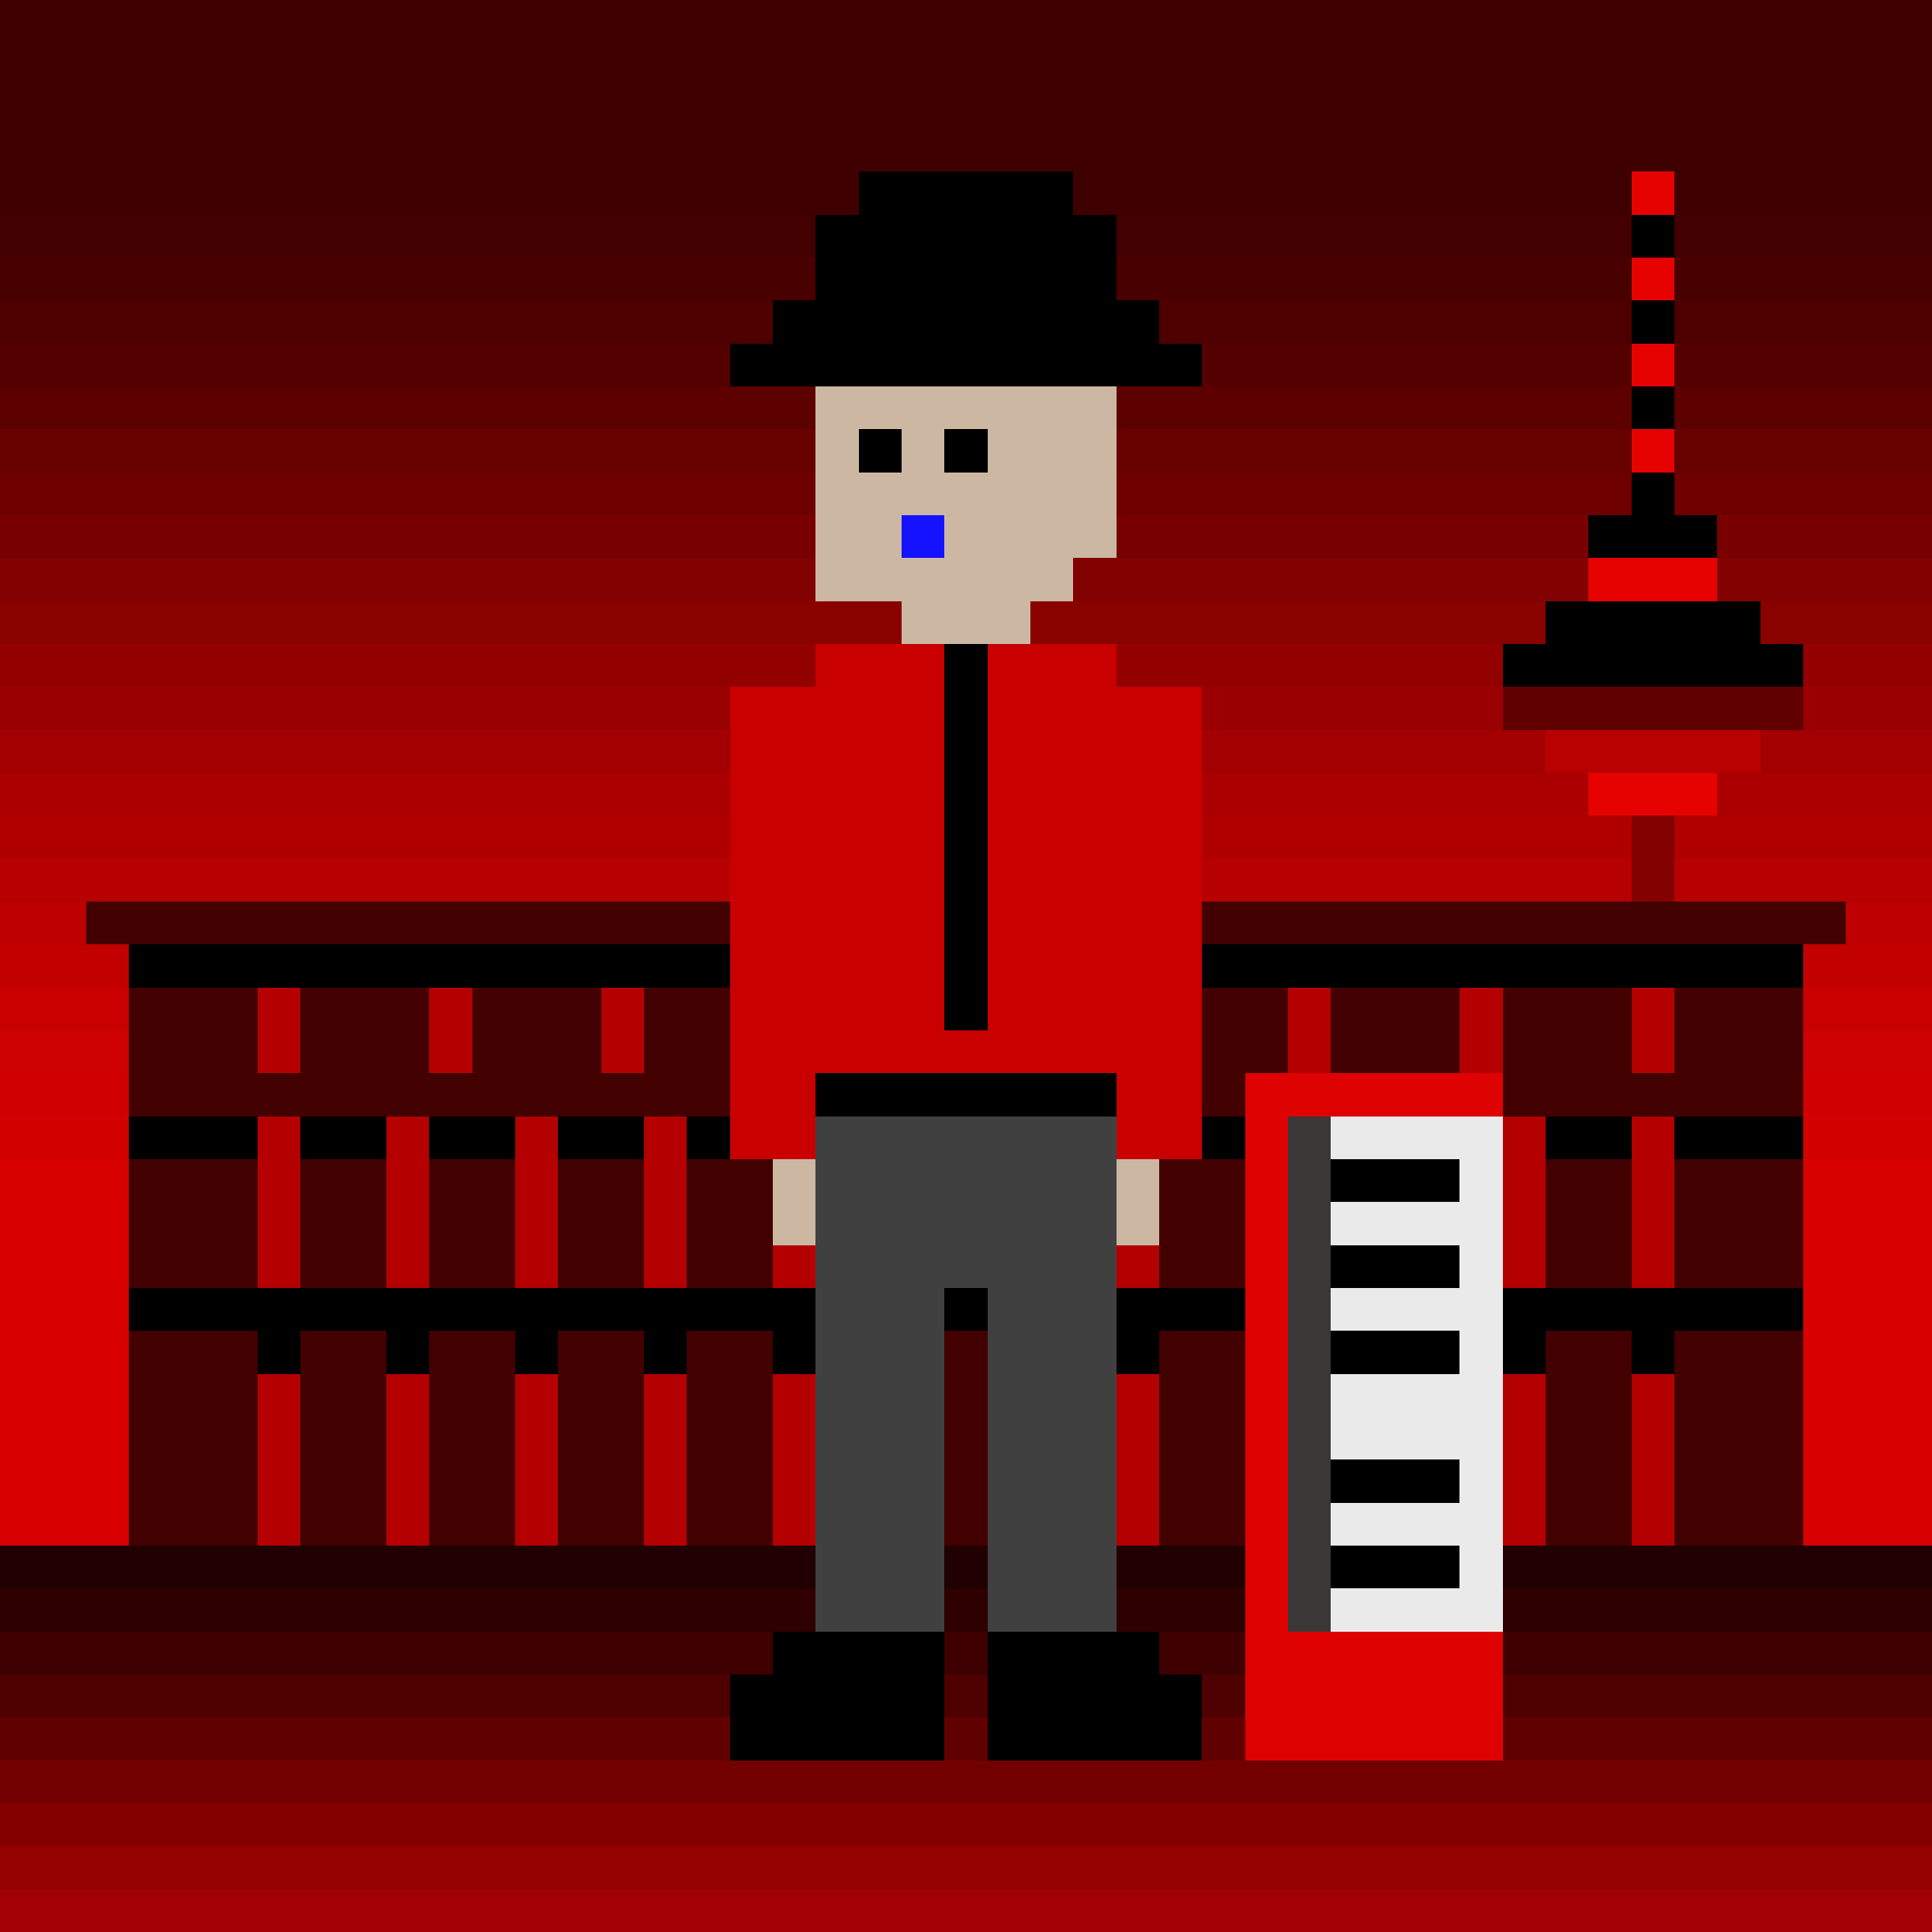 A pixel drawing of a man in a red shirt standing beside a keyboard with a TV tower in the background